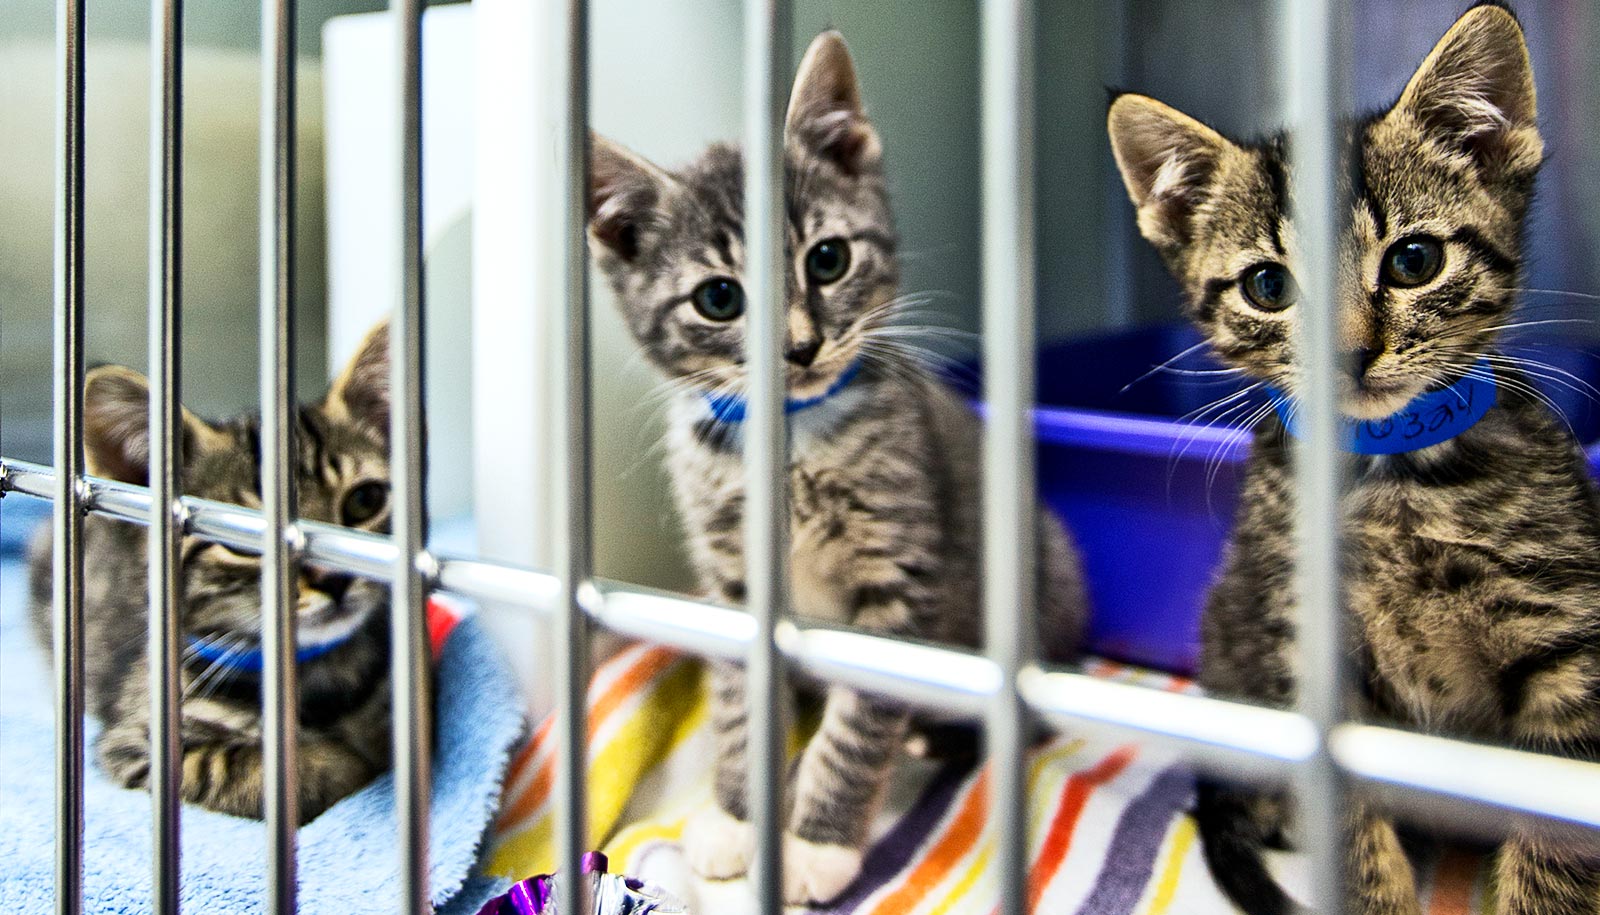 More COVID-19 fallout: Overcrowded animal shelters - Futurity